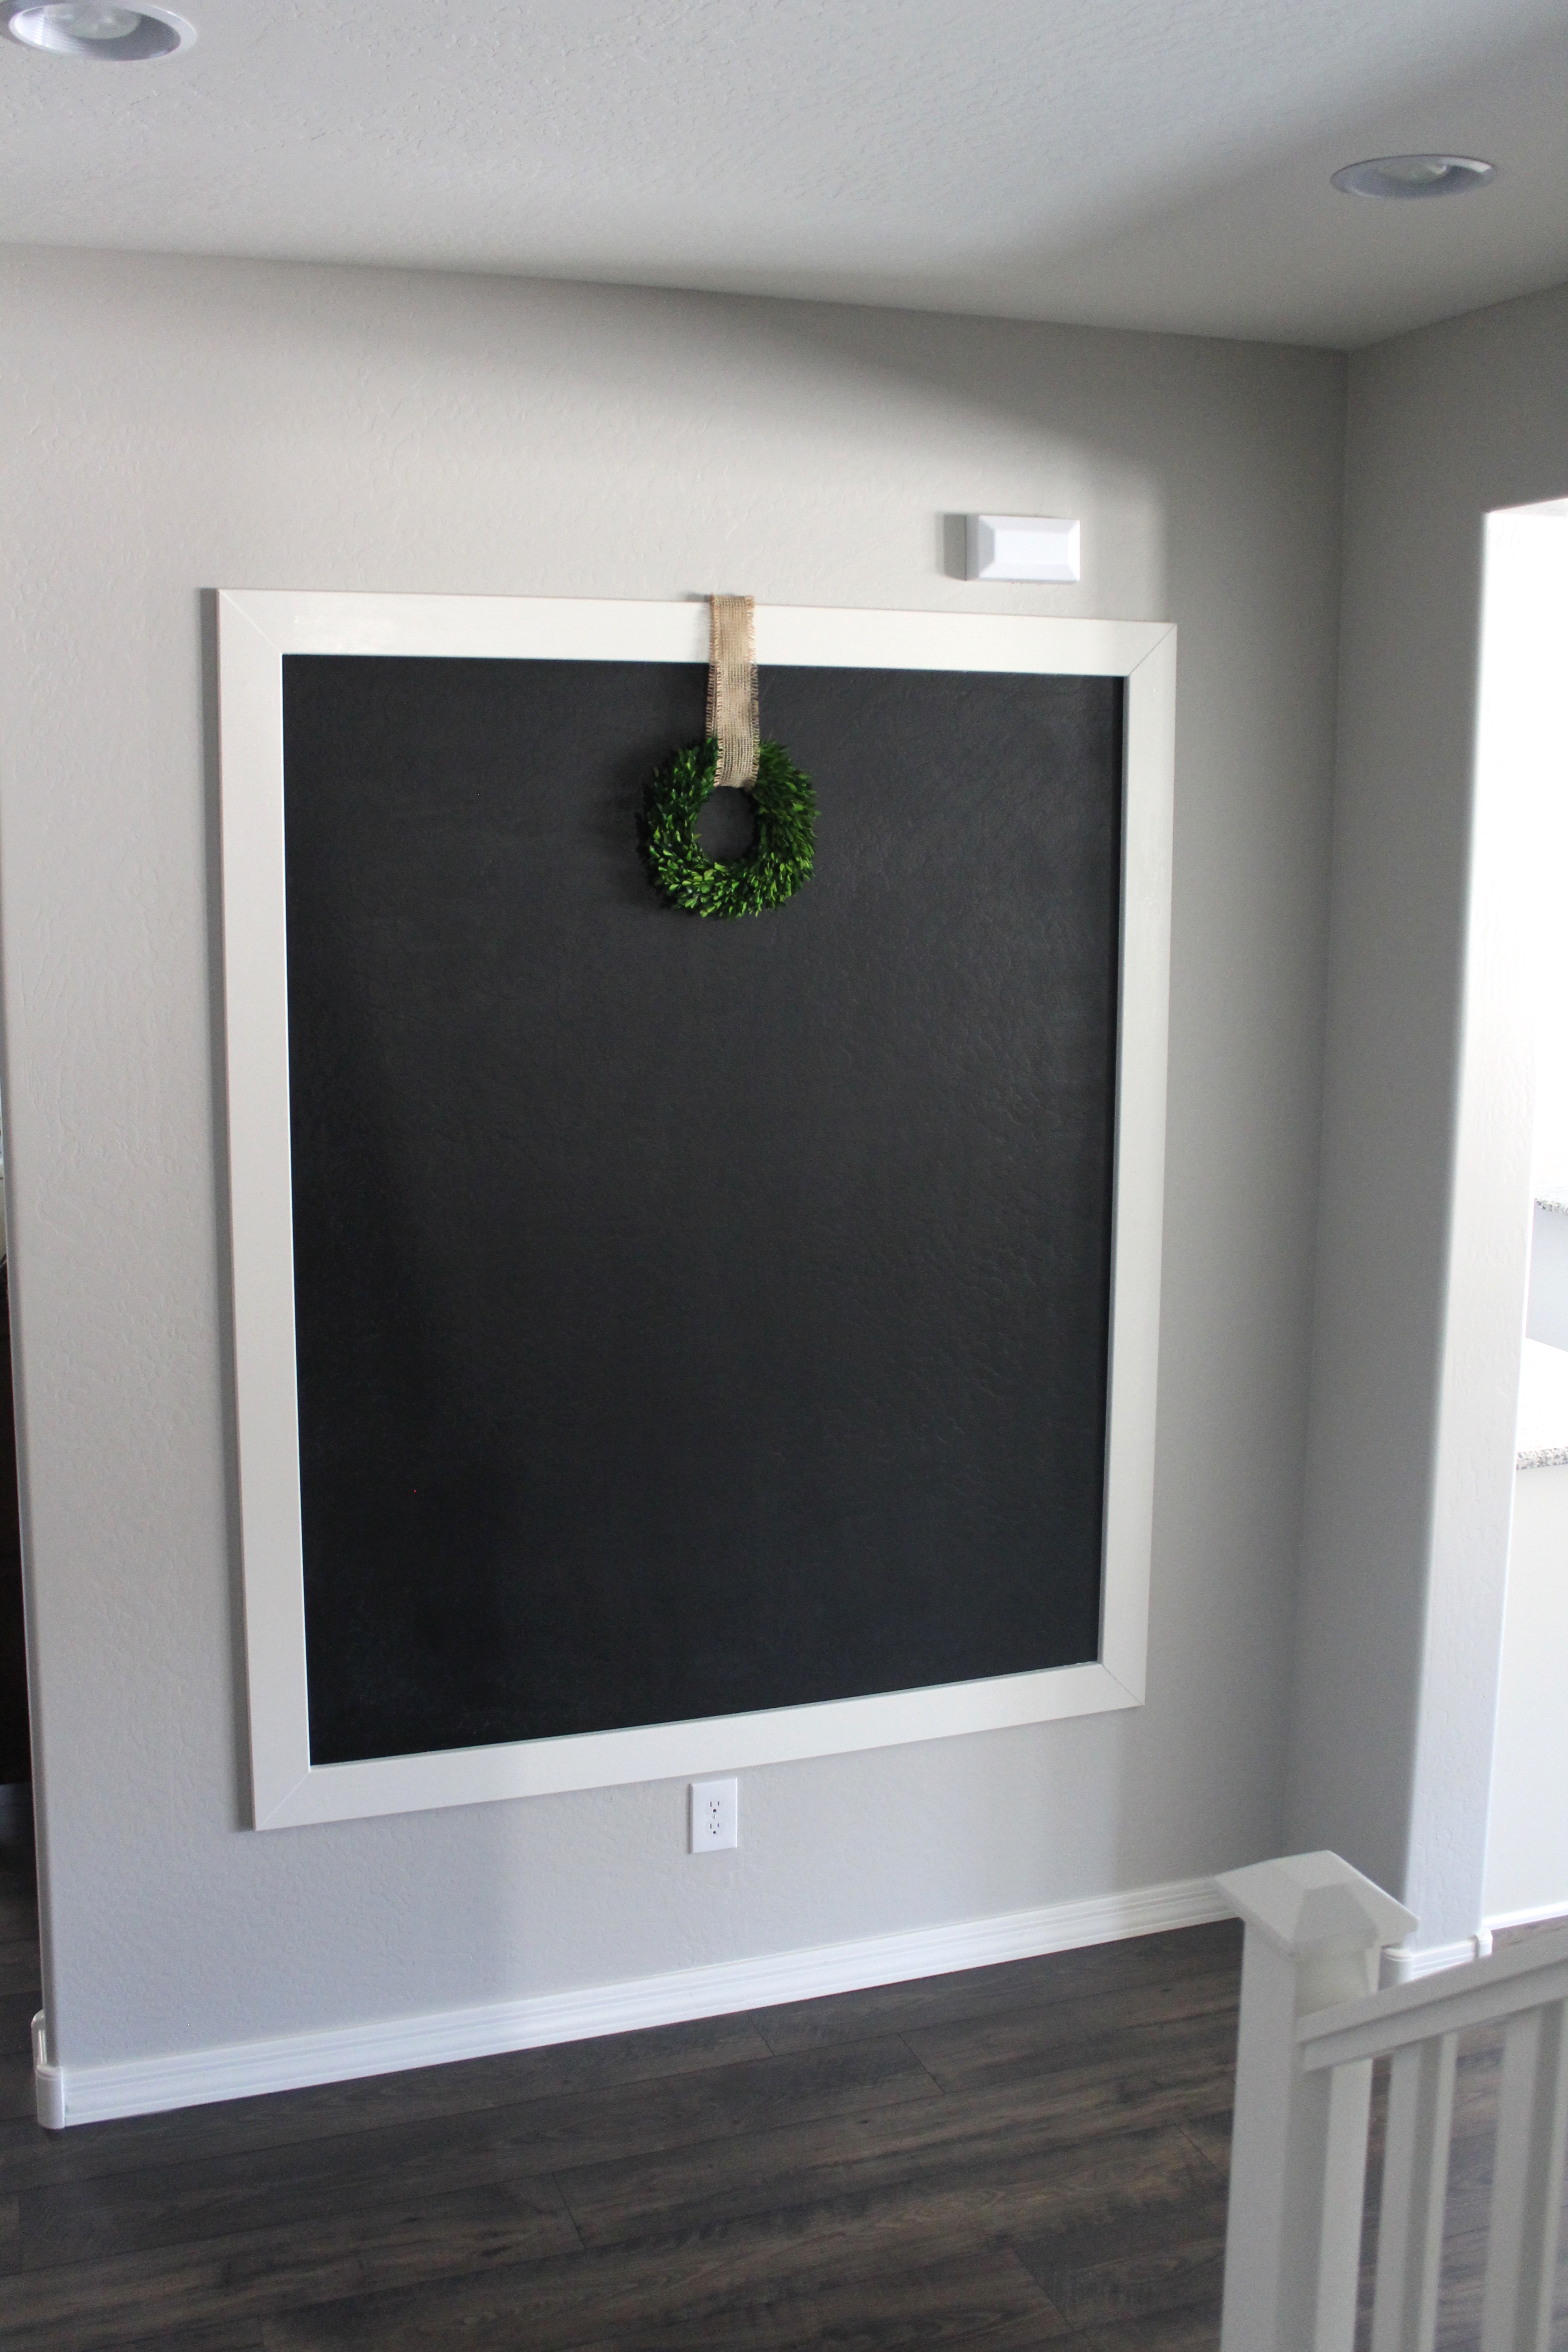 What Is Chalkboard Paint? - Where To Buy Chalkboard Paint and How To Use